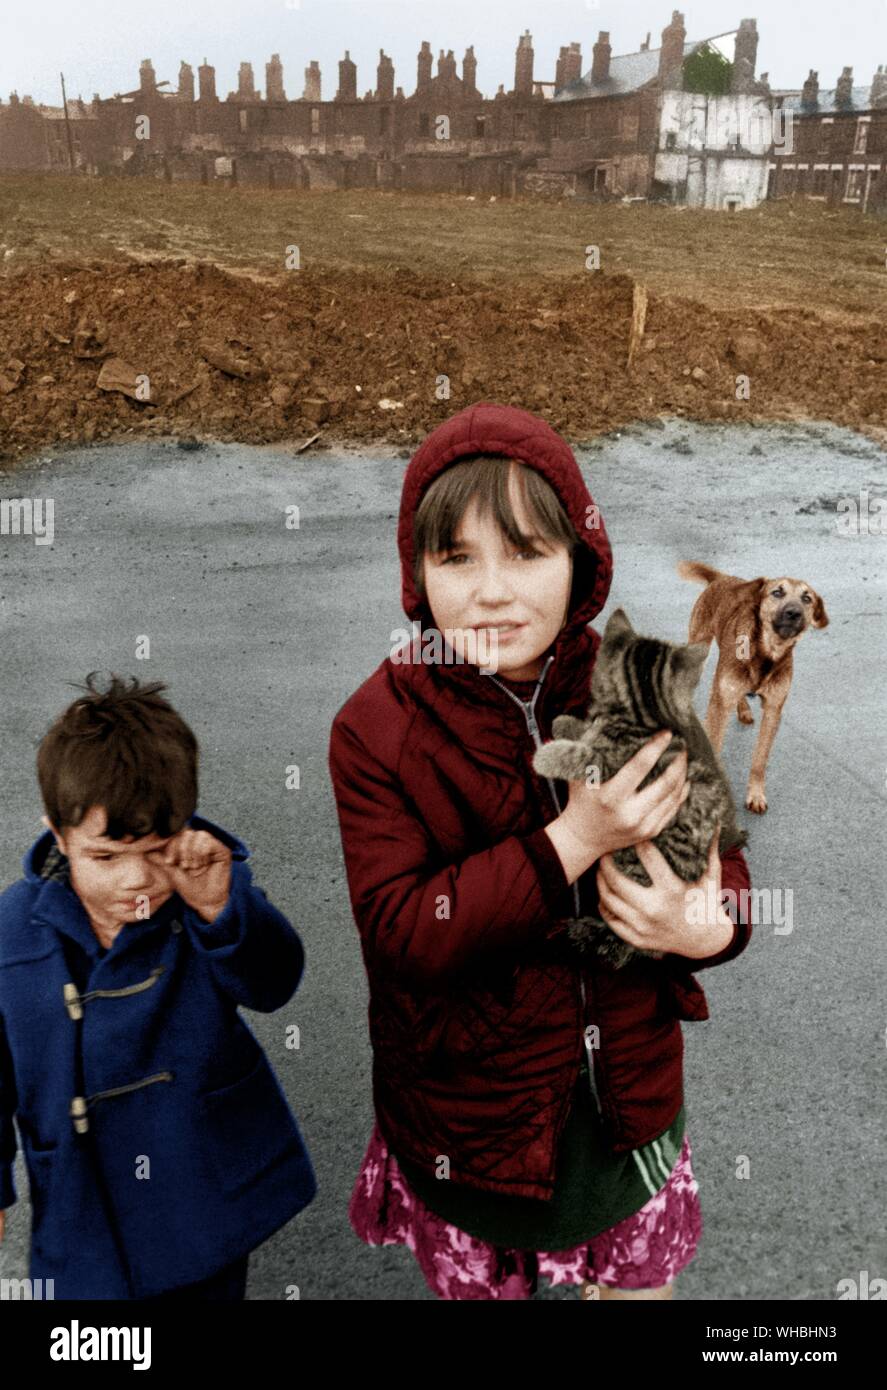 Children in Manchester in 1970. Brother and sister with their pets, a kitten and a dog Stock Photo